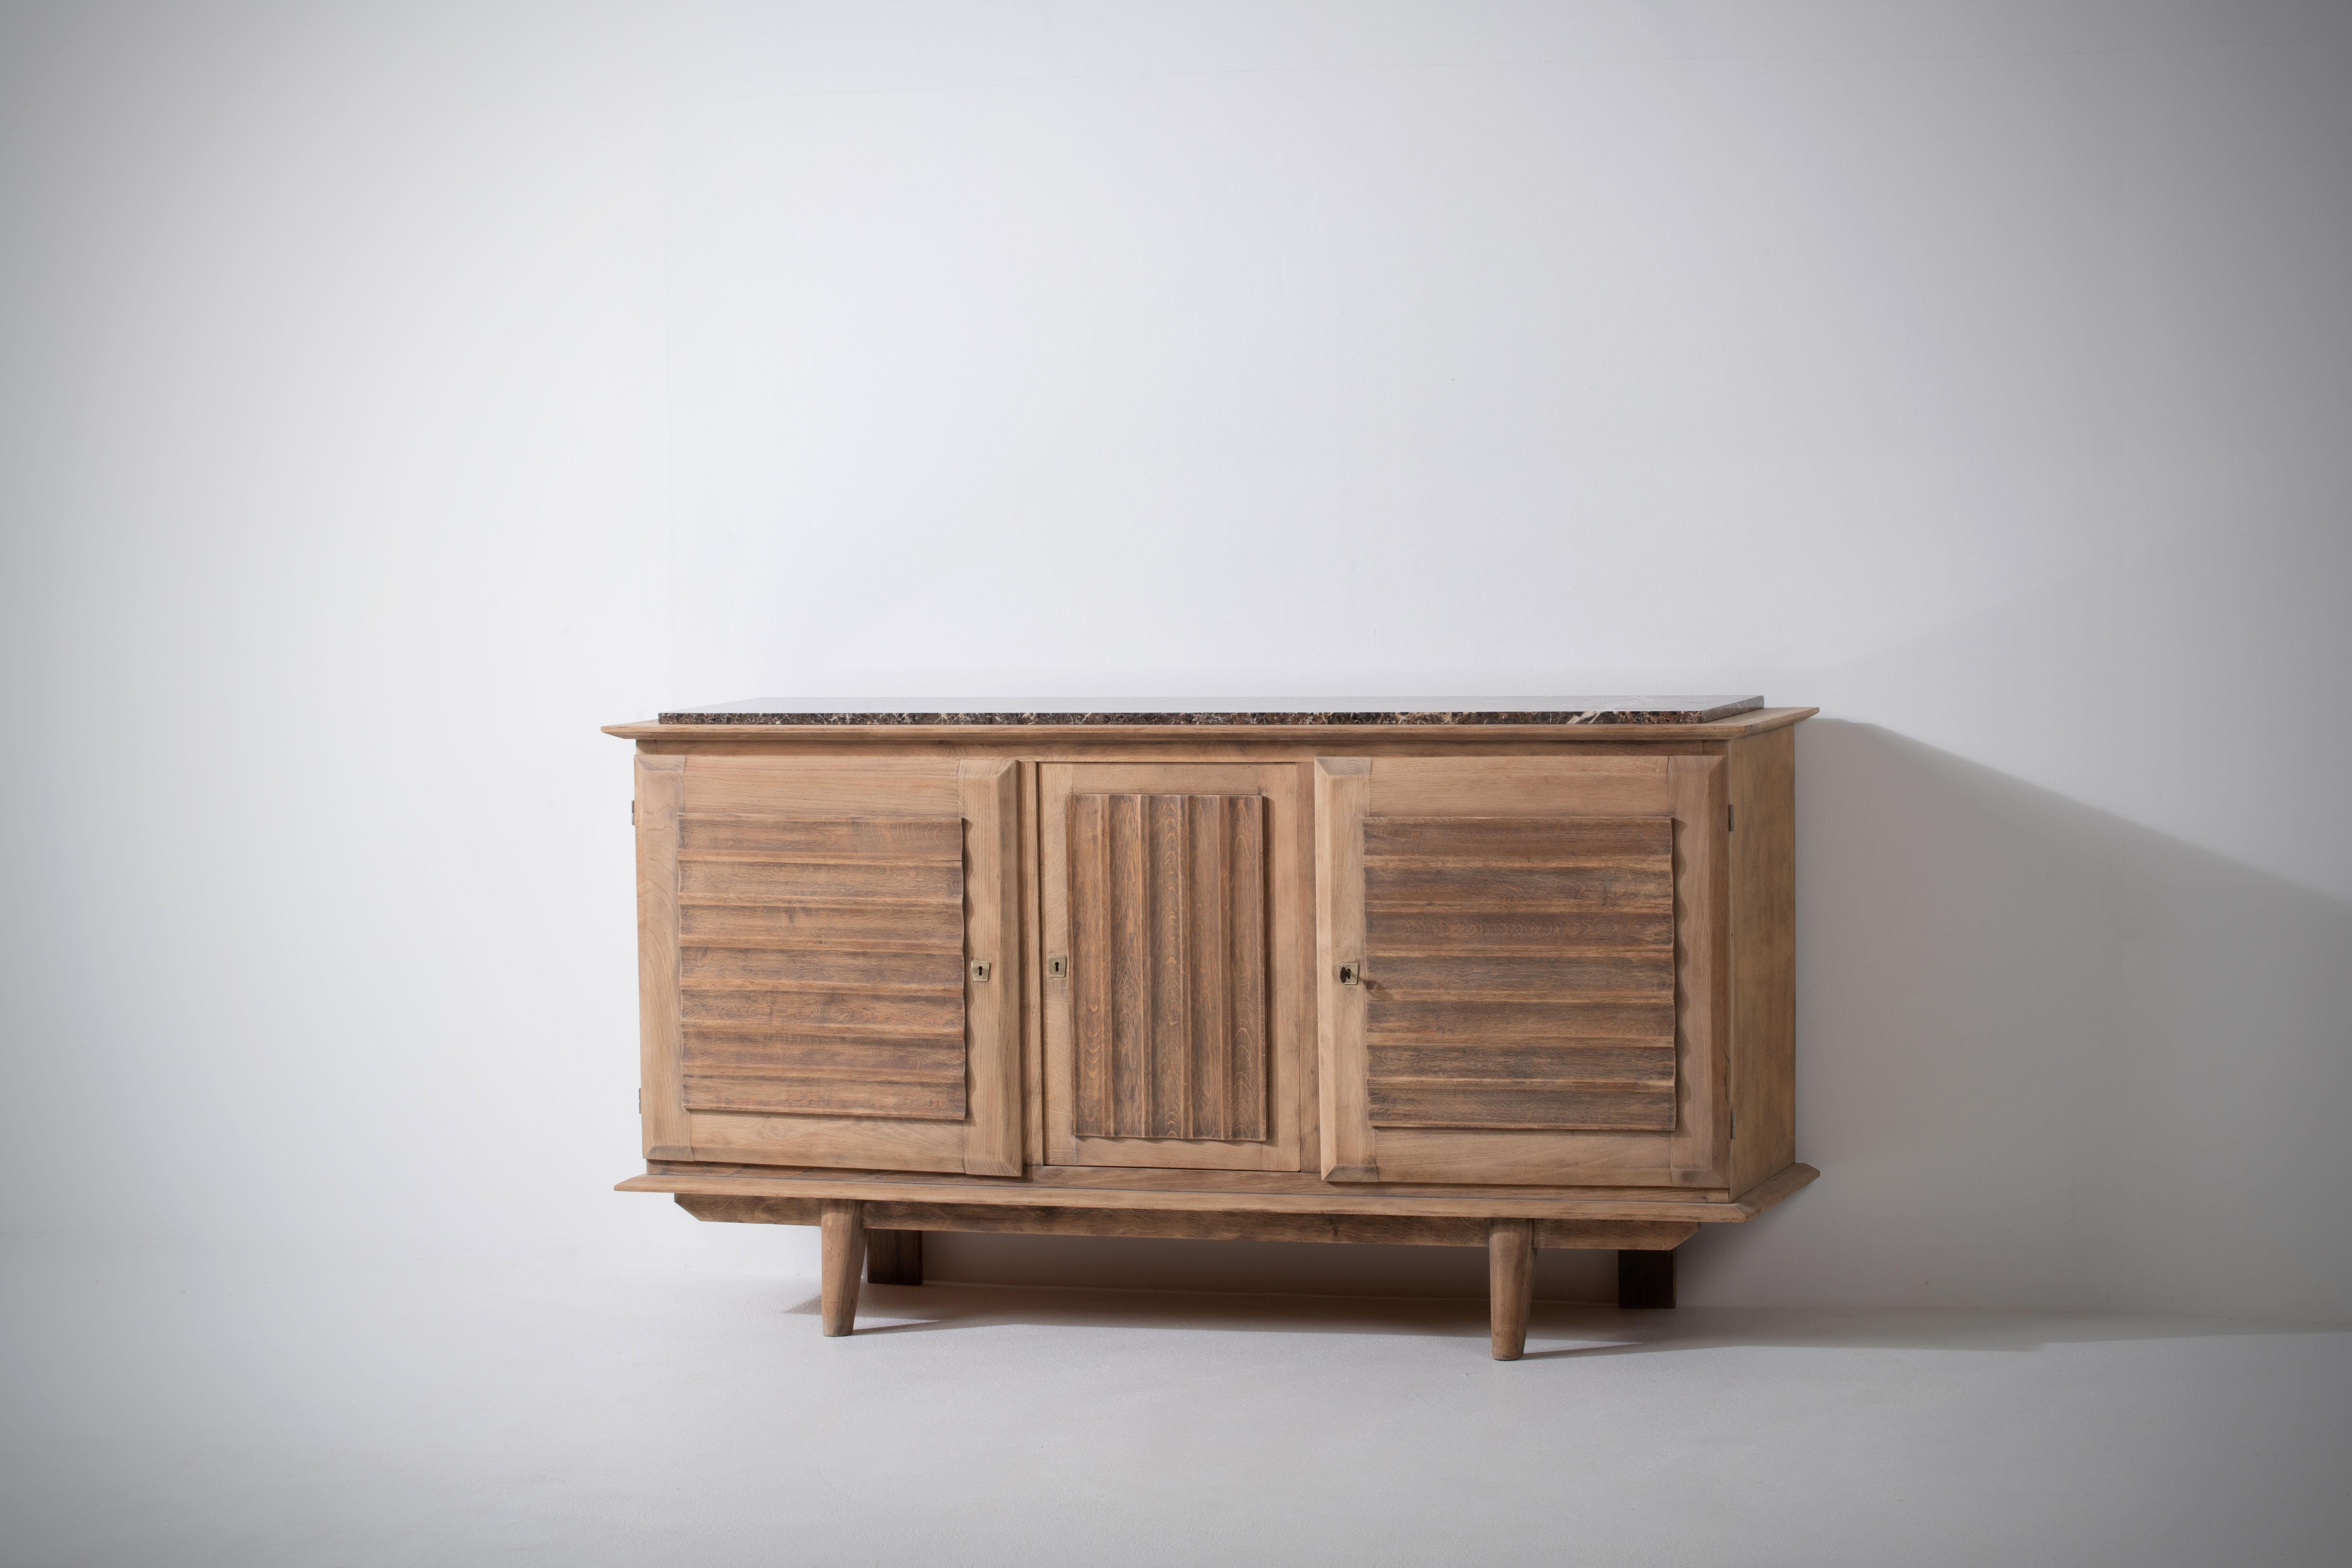 Introducing a stunning French Art Deco buffet from the 1940s, crafted with exquisite natural oak and crowned with a luxurious marble top. This exceptional piece showcases the elegance and sophistication of the Art Deco era, with its scalloped